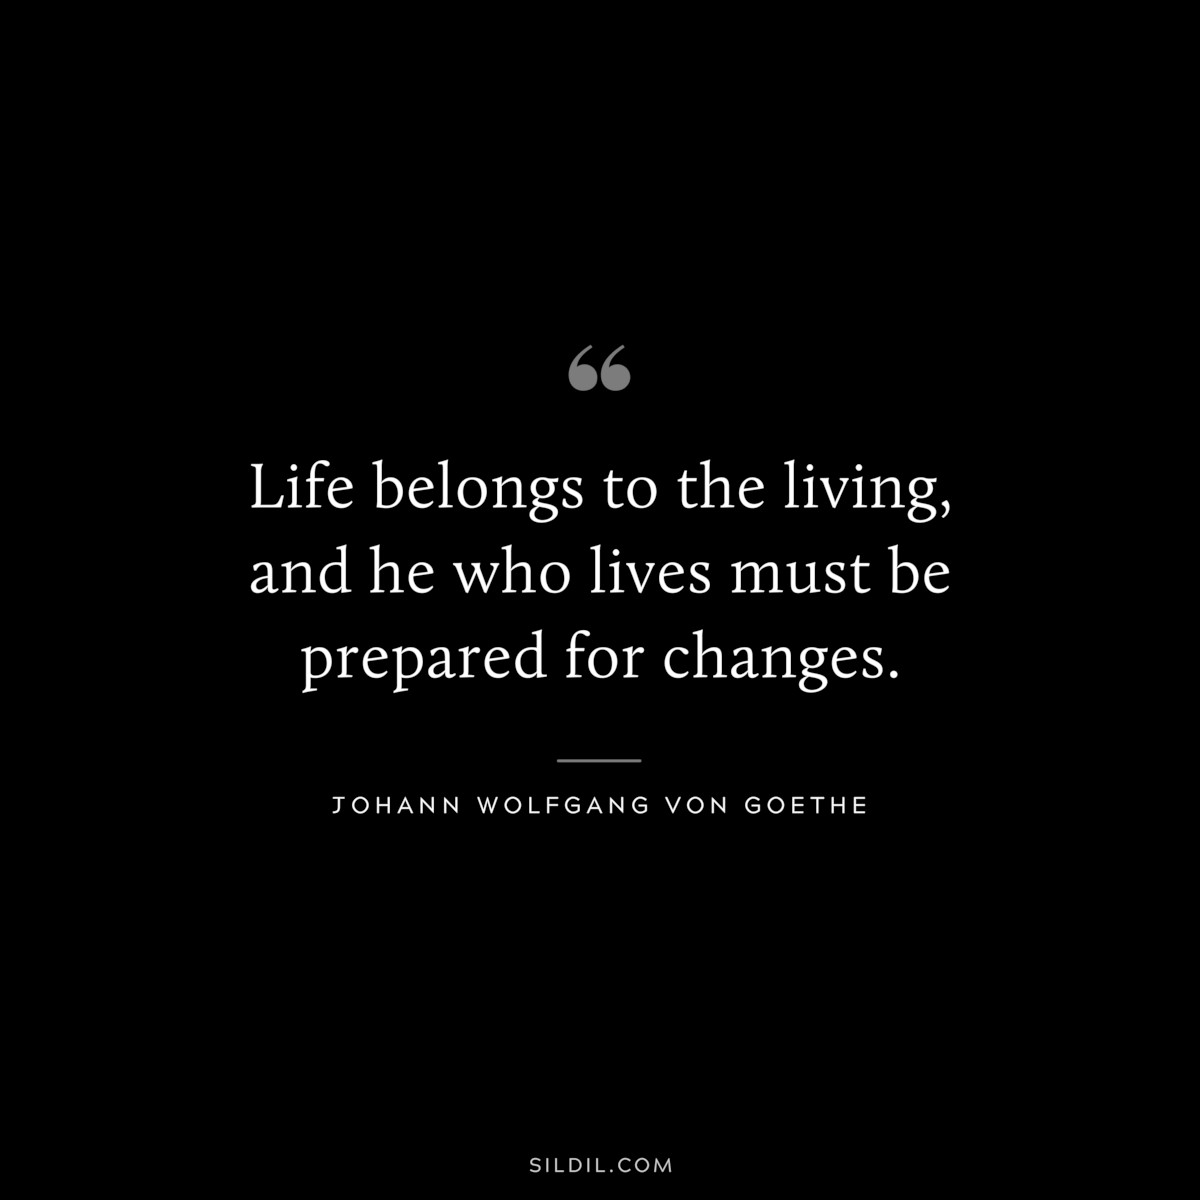 Life belongs to the living, and he who lives must be prepared for changes.― Johann Wolfgang von Goethe